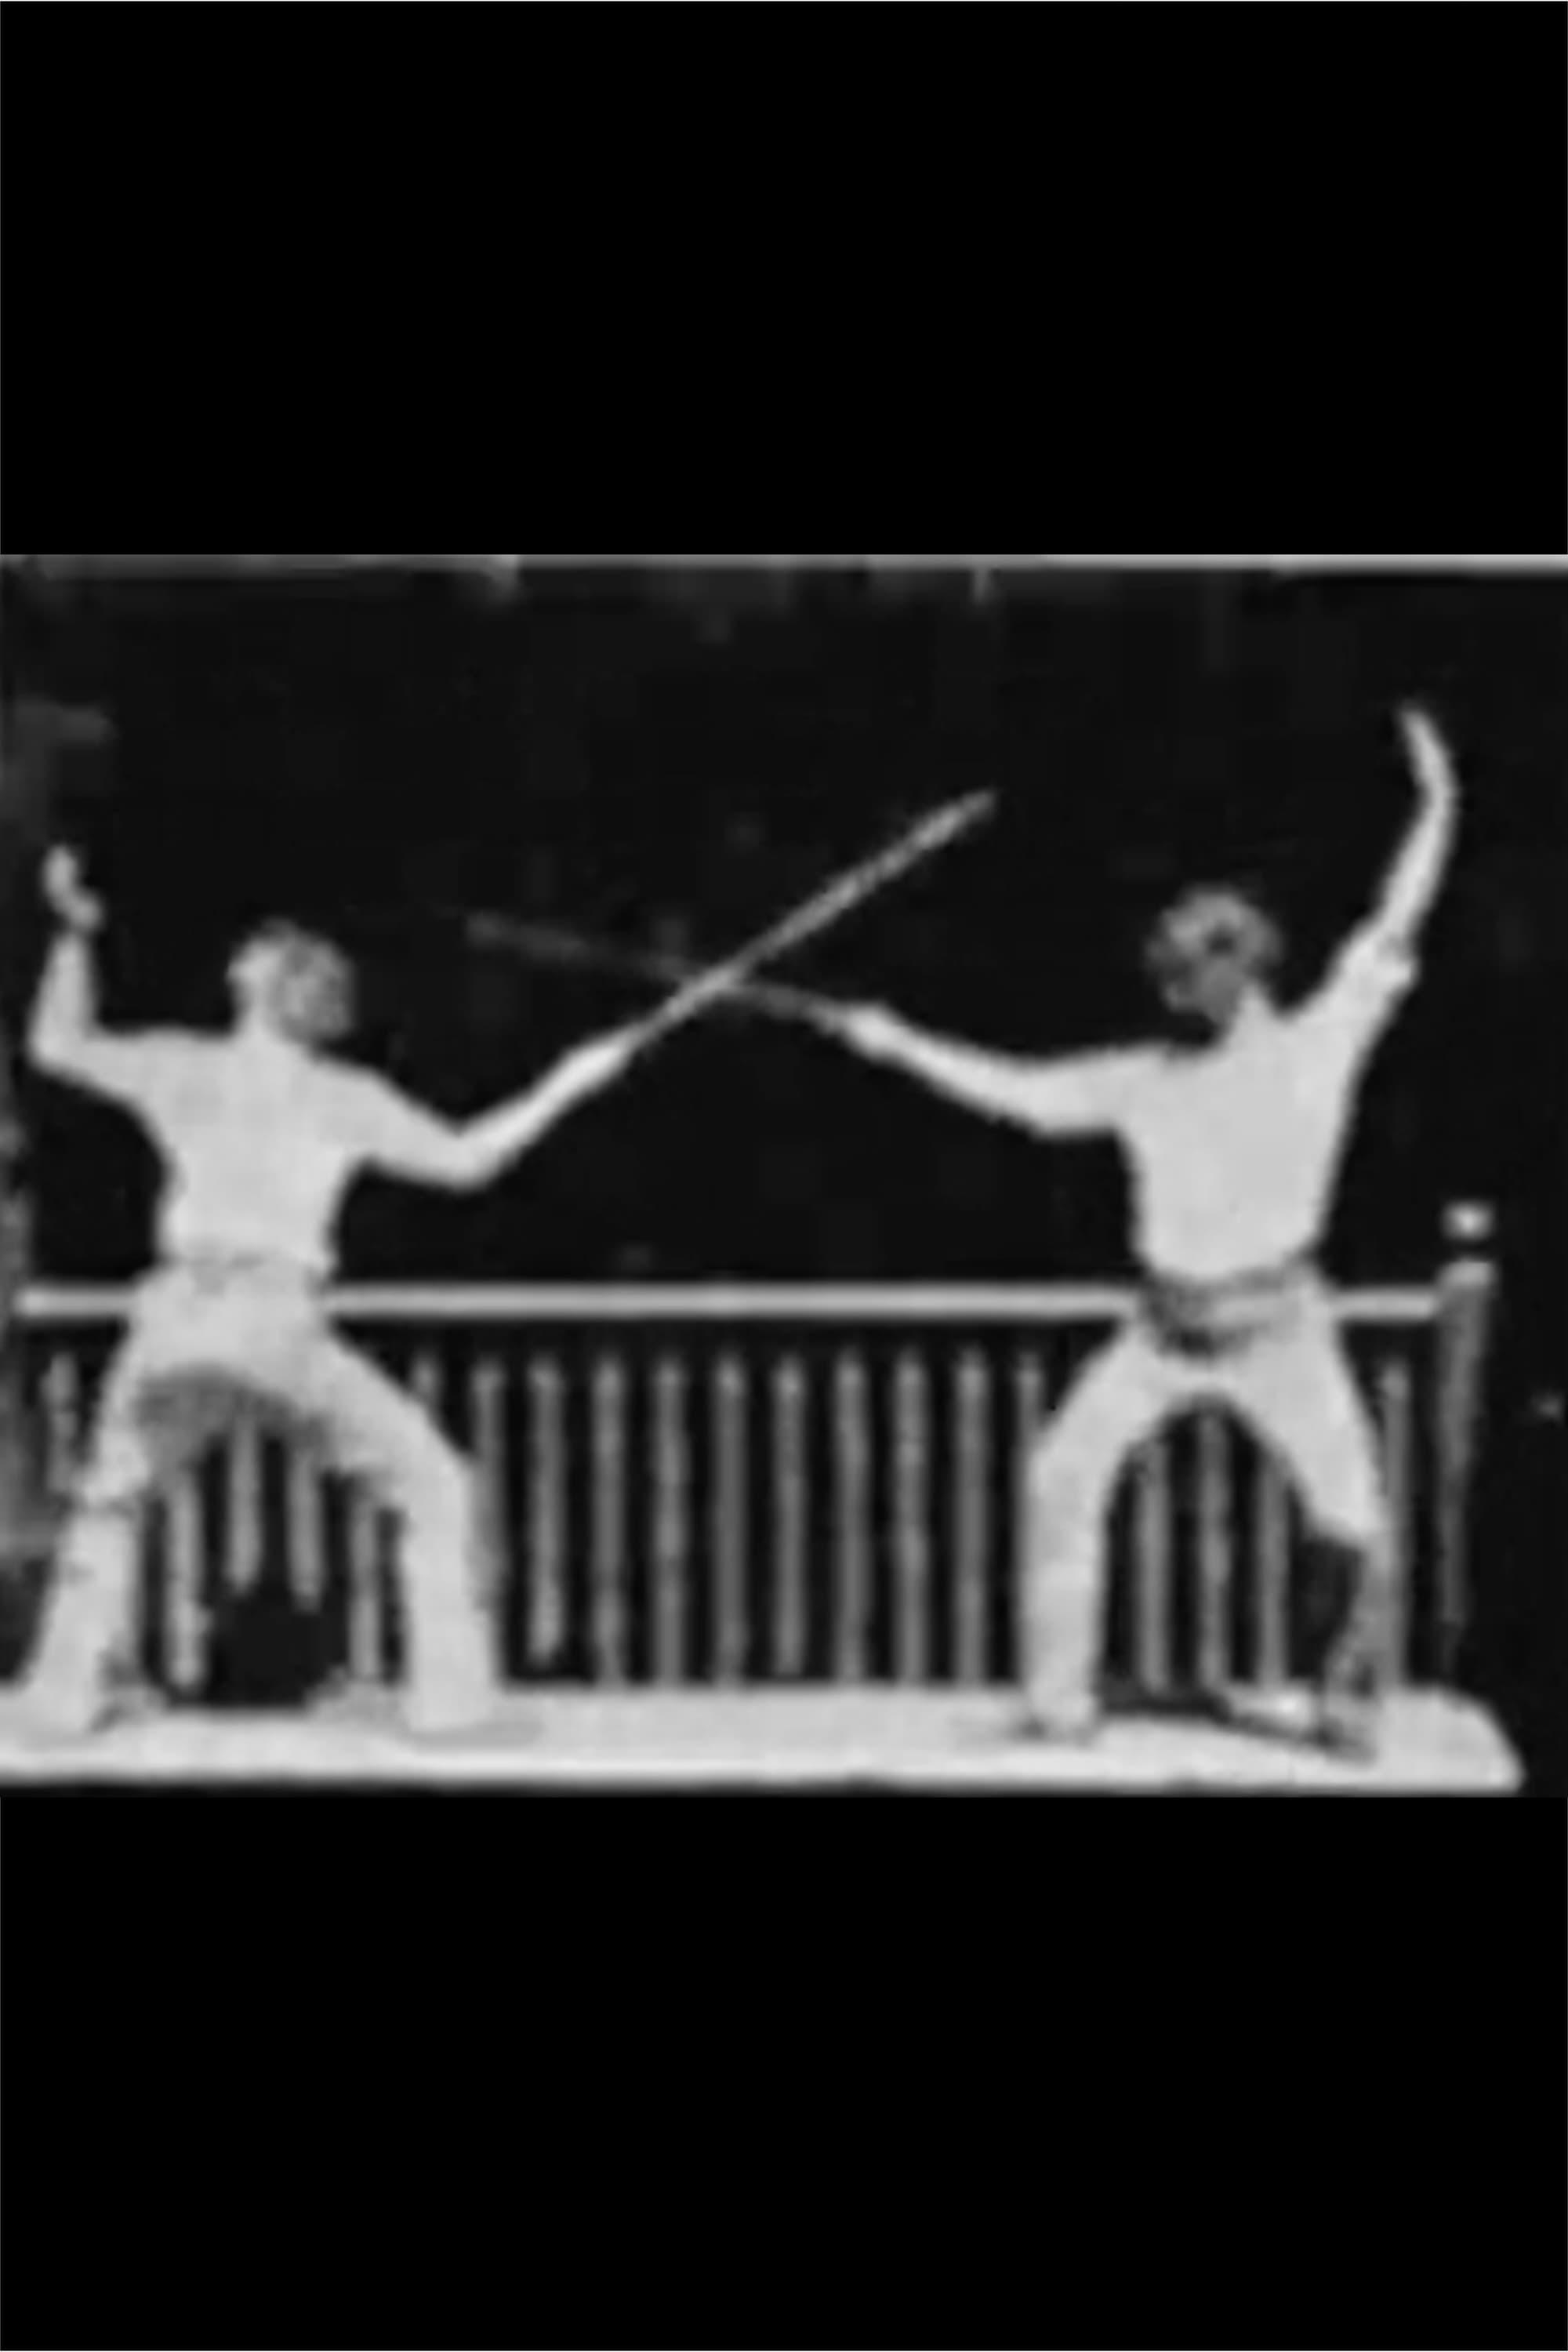 Fencing poster